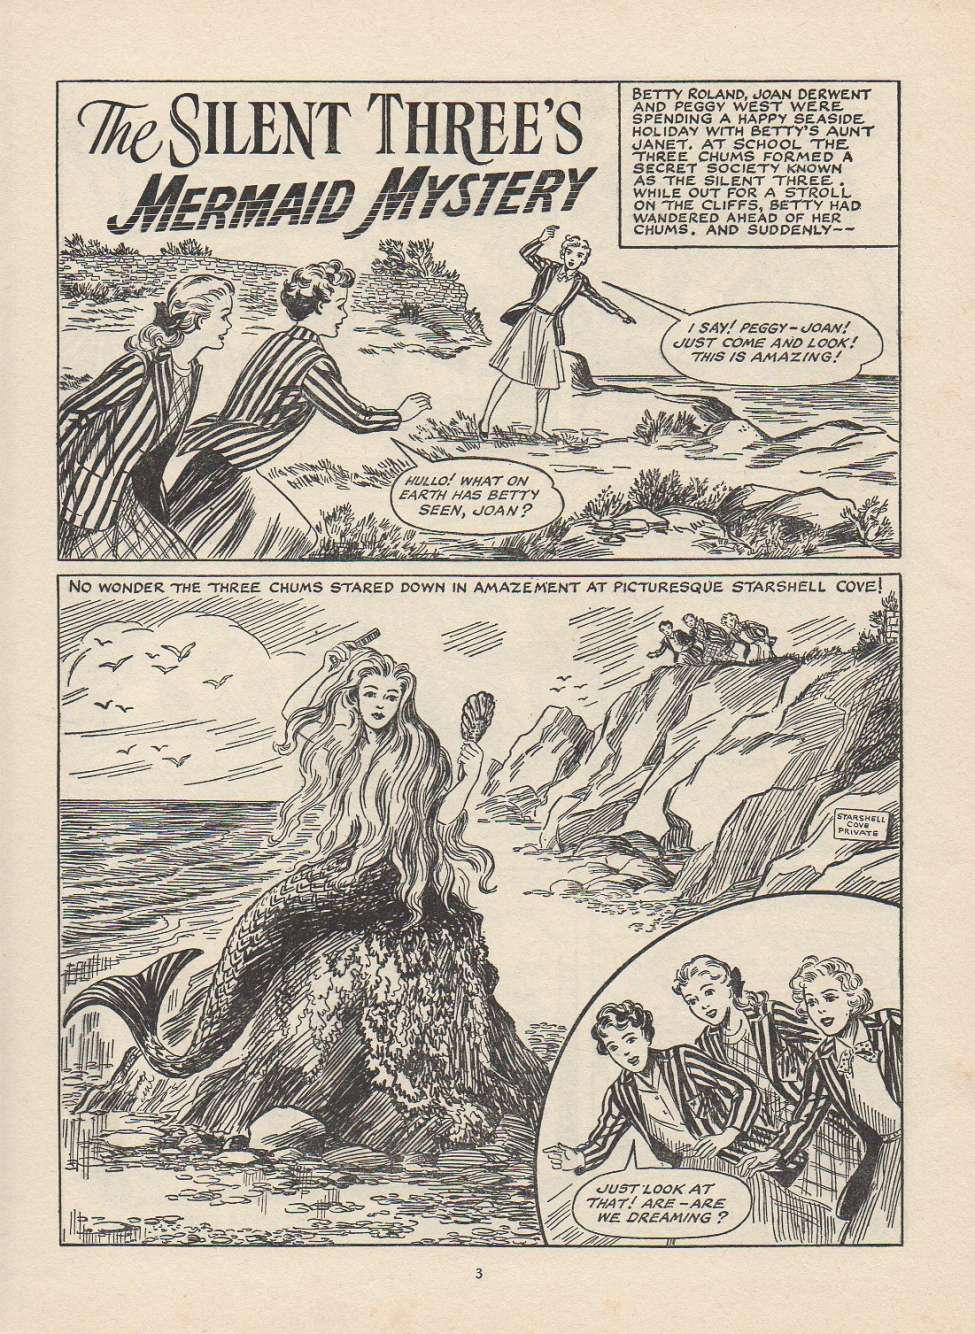 Book Cover For The Silent Three Mermaid Mystery